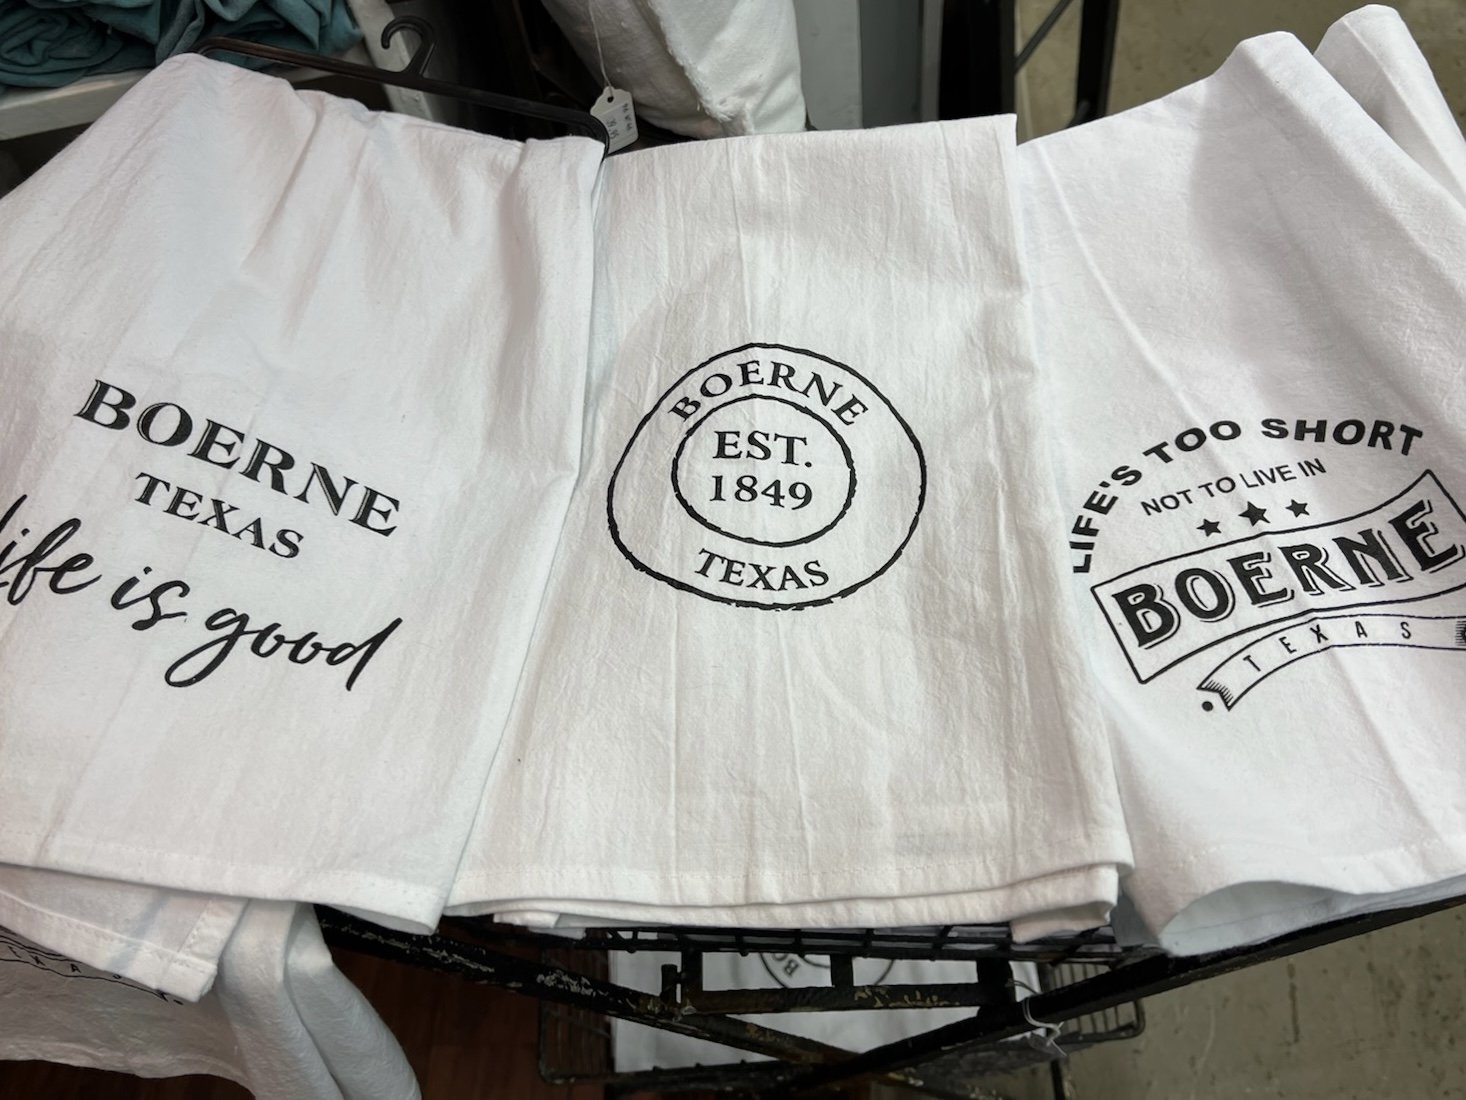 Boerne, Texas tea towels and home decor available at Corner Cartel | Boerne Main Street shopping